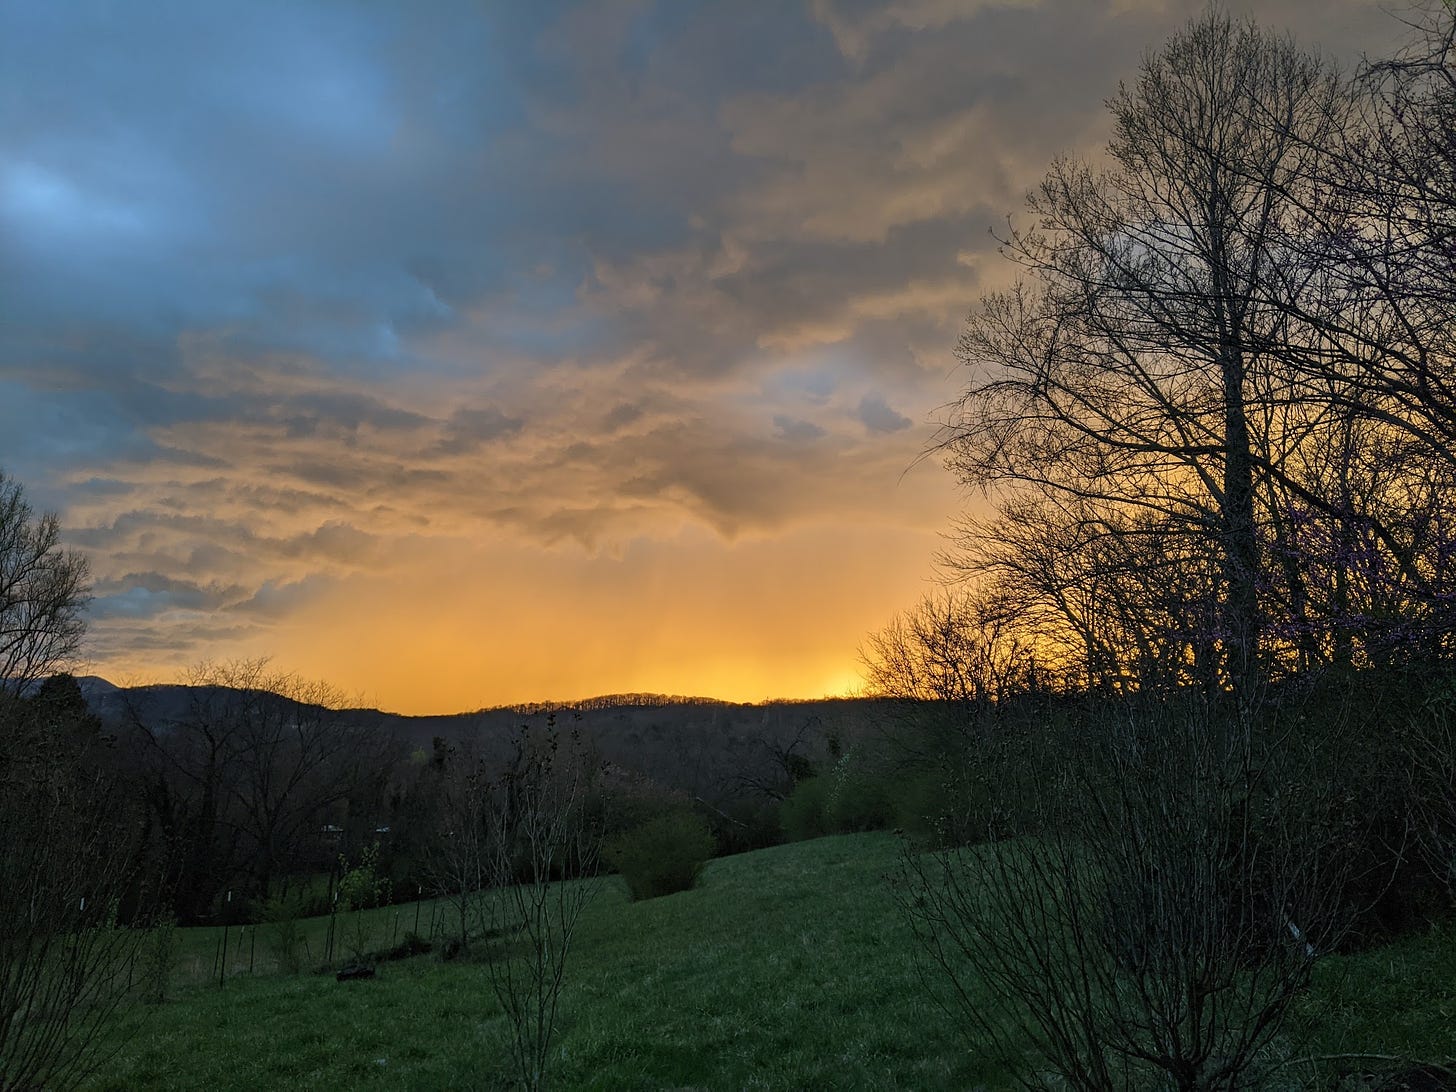 The last of an orange sunset, fading into blue-gray clouds, silhouettes trees as it disappears behind the mountains.